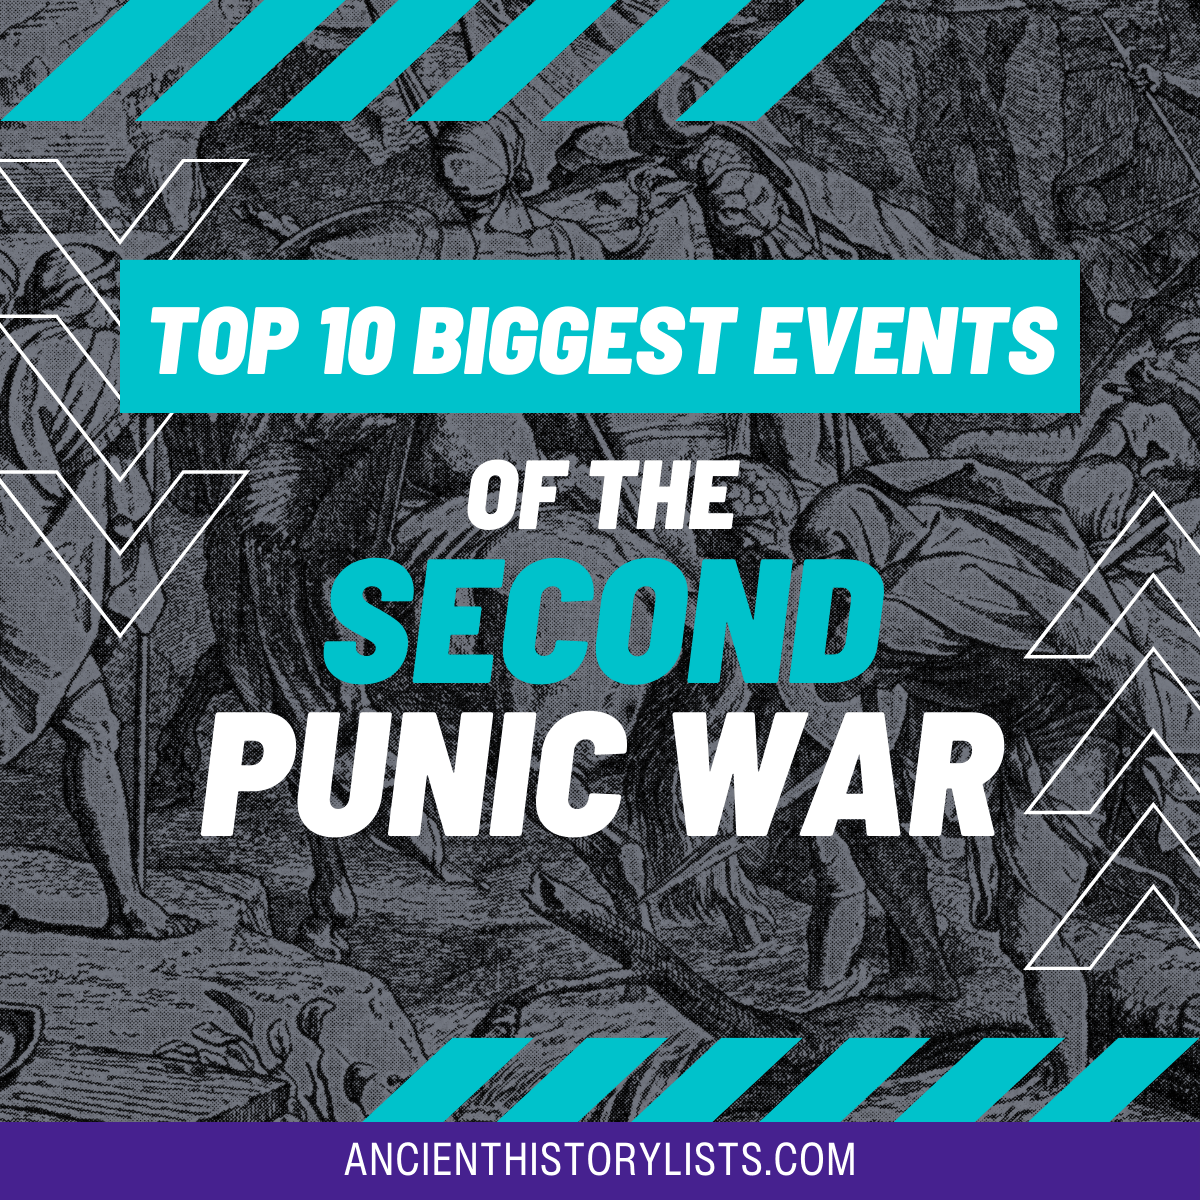 Biggest Events of the Second Punic Wa